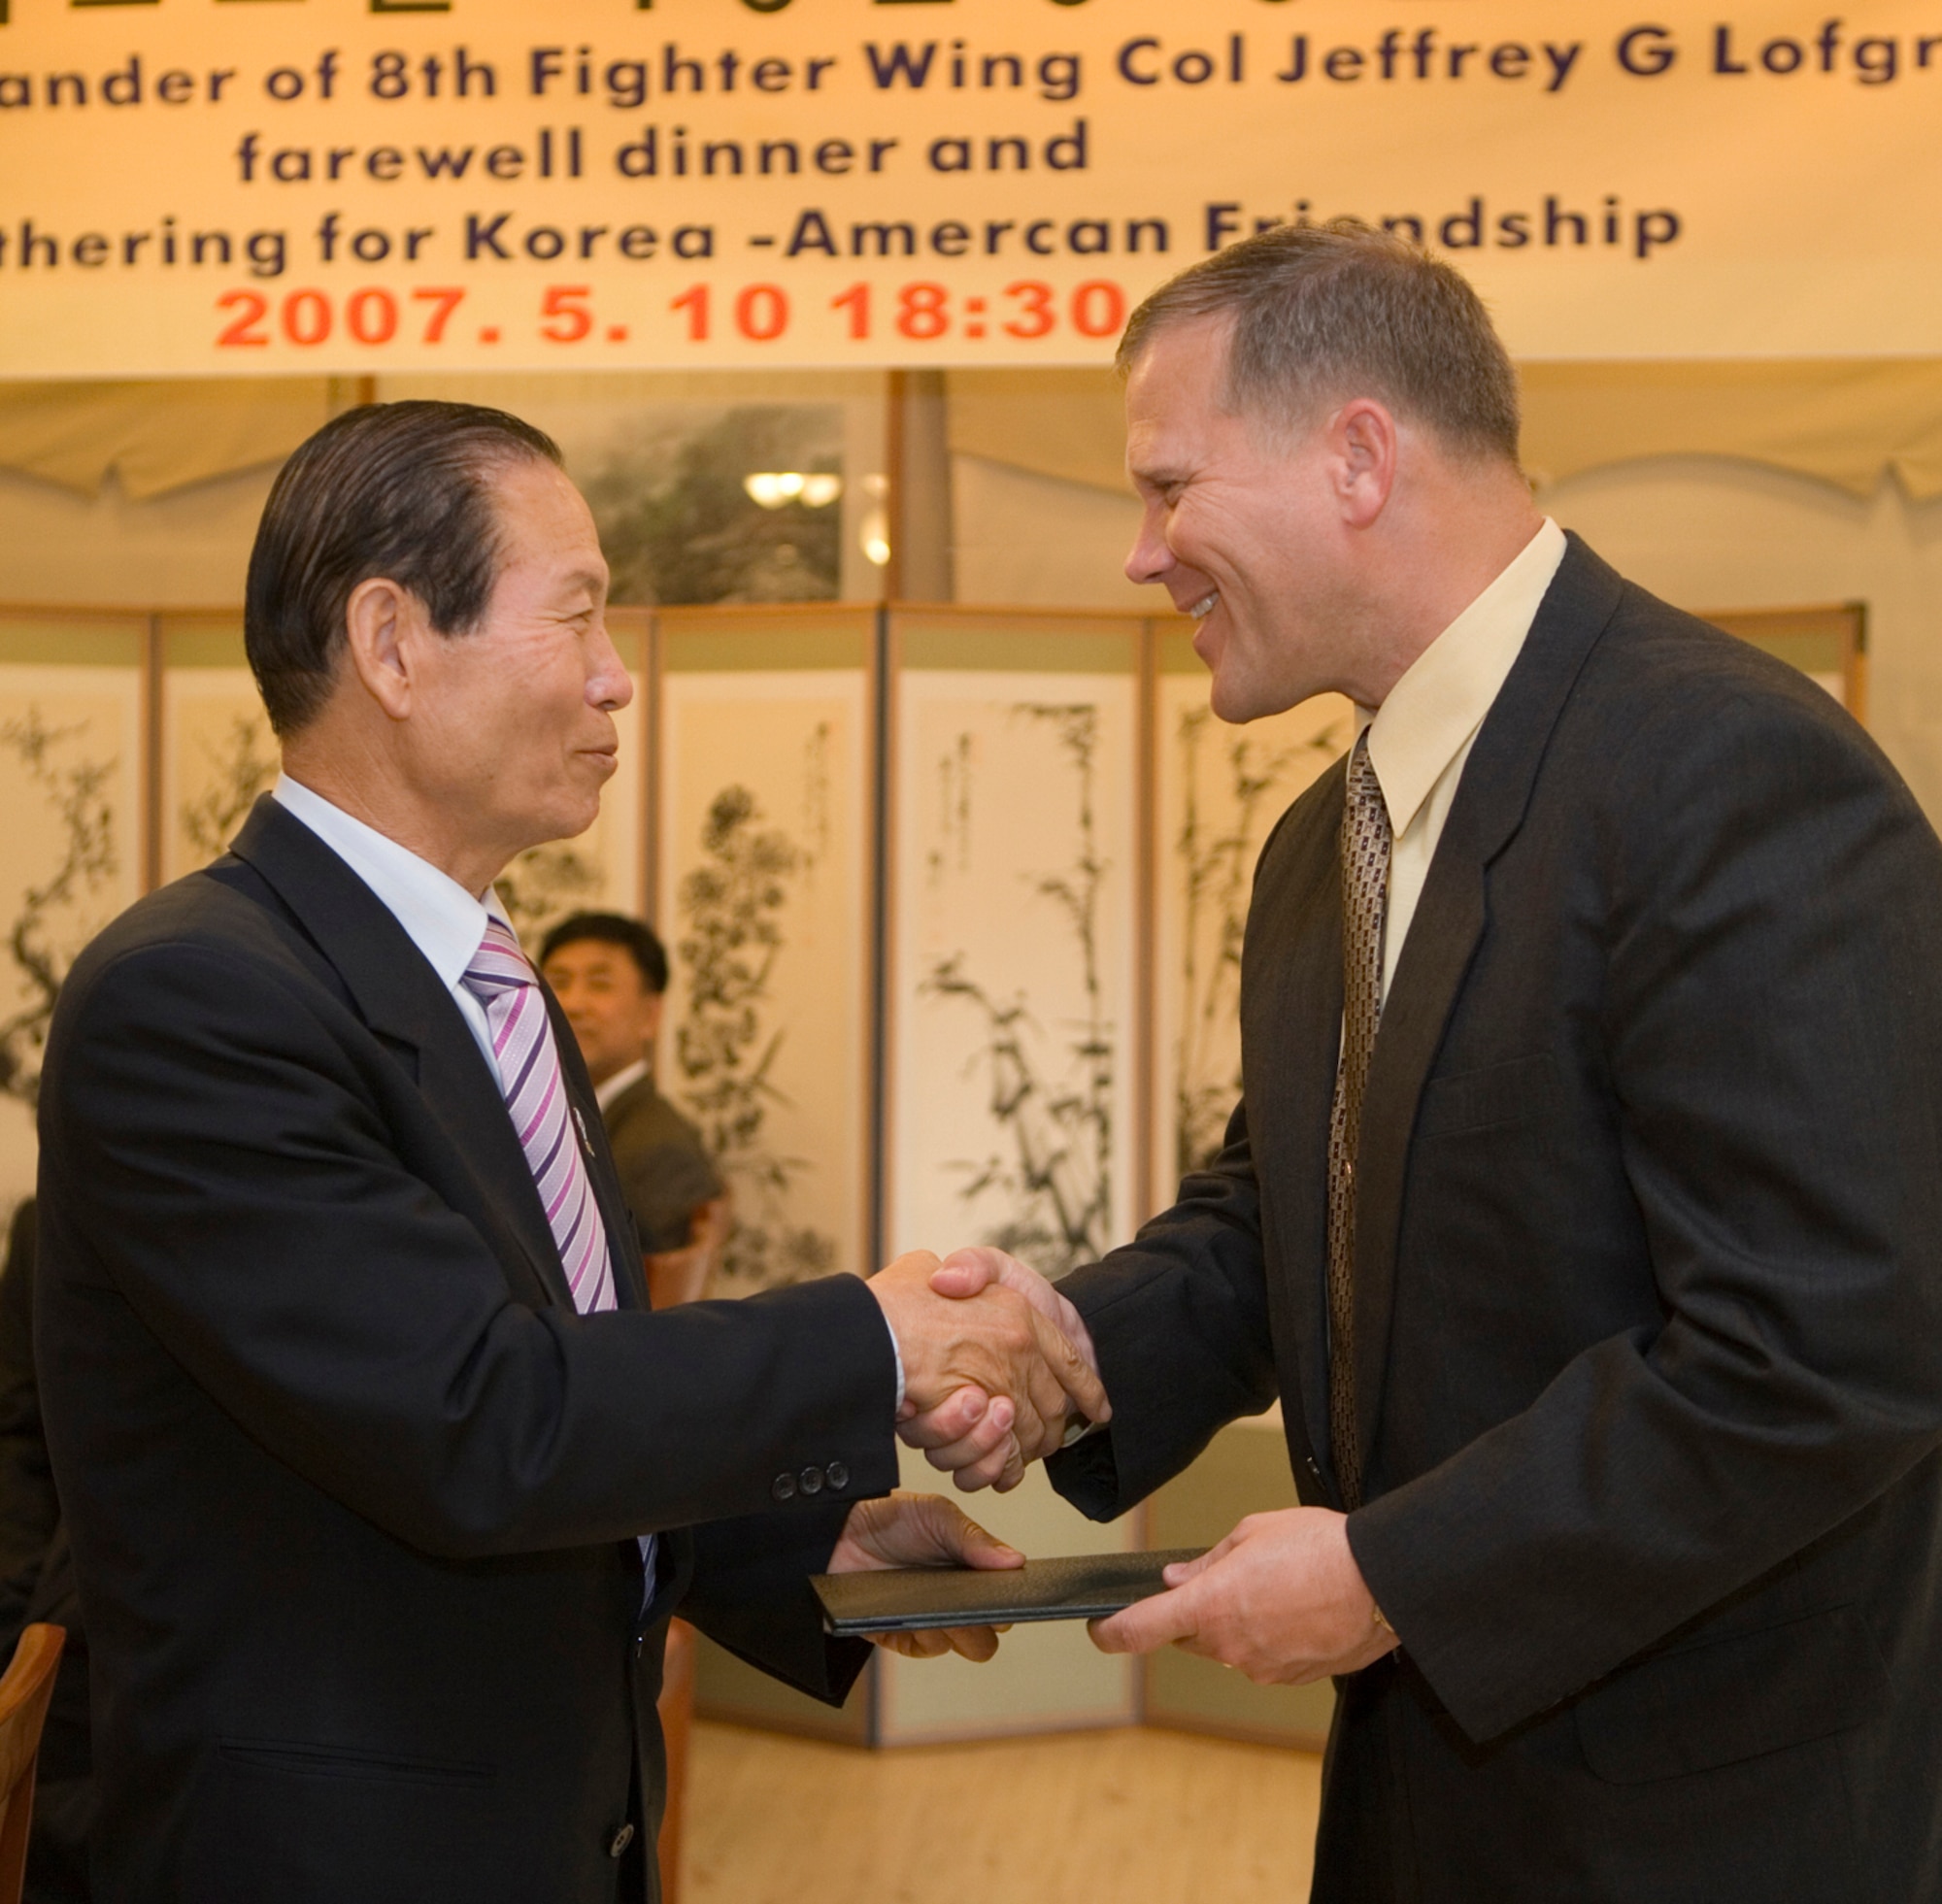 GUNSAN CITY, Republic of Korea  May 10, 2007 -- Col. Jeff "Wolf" Lofgren, 8th Fighter Wing commander (right) and Gunsan City mayor Moon, Dong Shin shake hands during a farewell dinner May 10. Colonel Lofgren was also named an honorary citizen of Gunsan City for his "contribution to the development of Gunsan," according to the awards plaque. The 8th FW commander was joined by the unit's group commanders, where they were each recognized for their service to the community. (Courtesy photo)